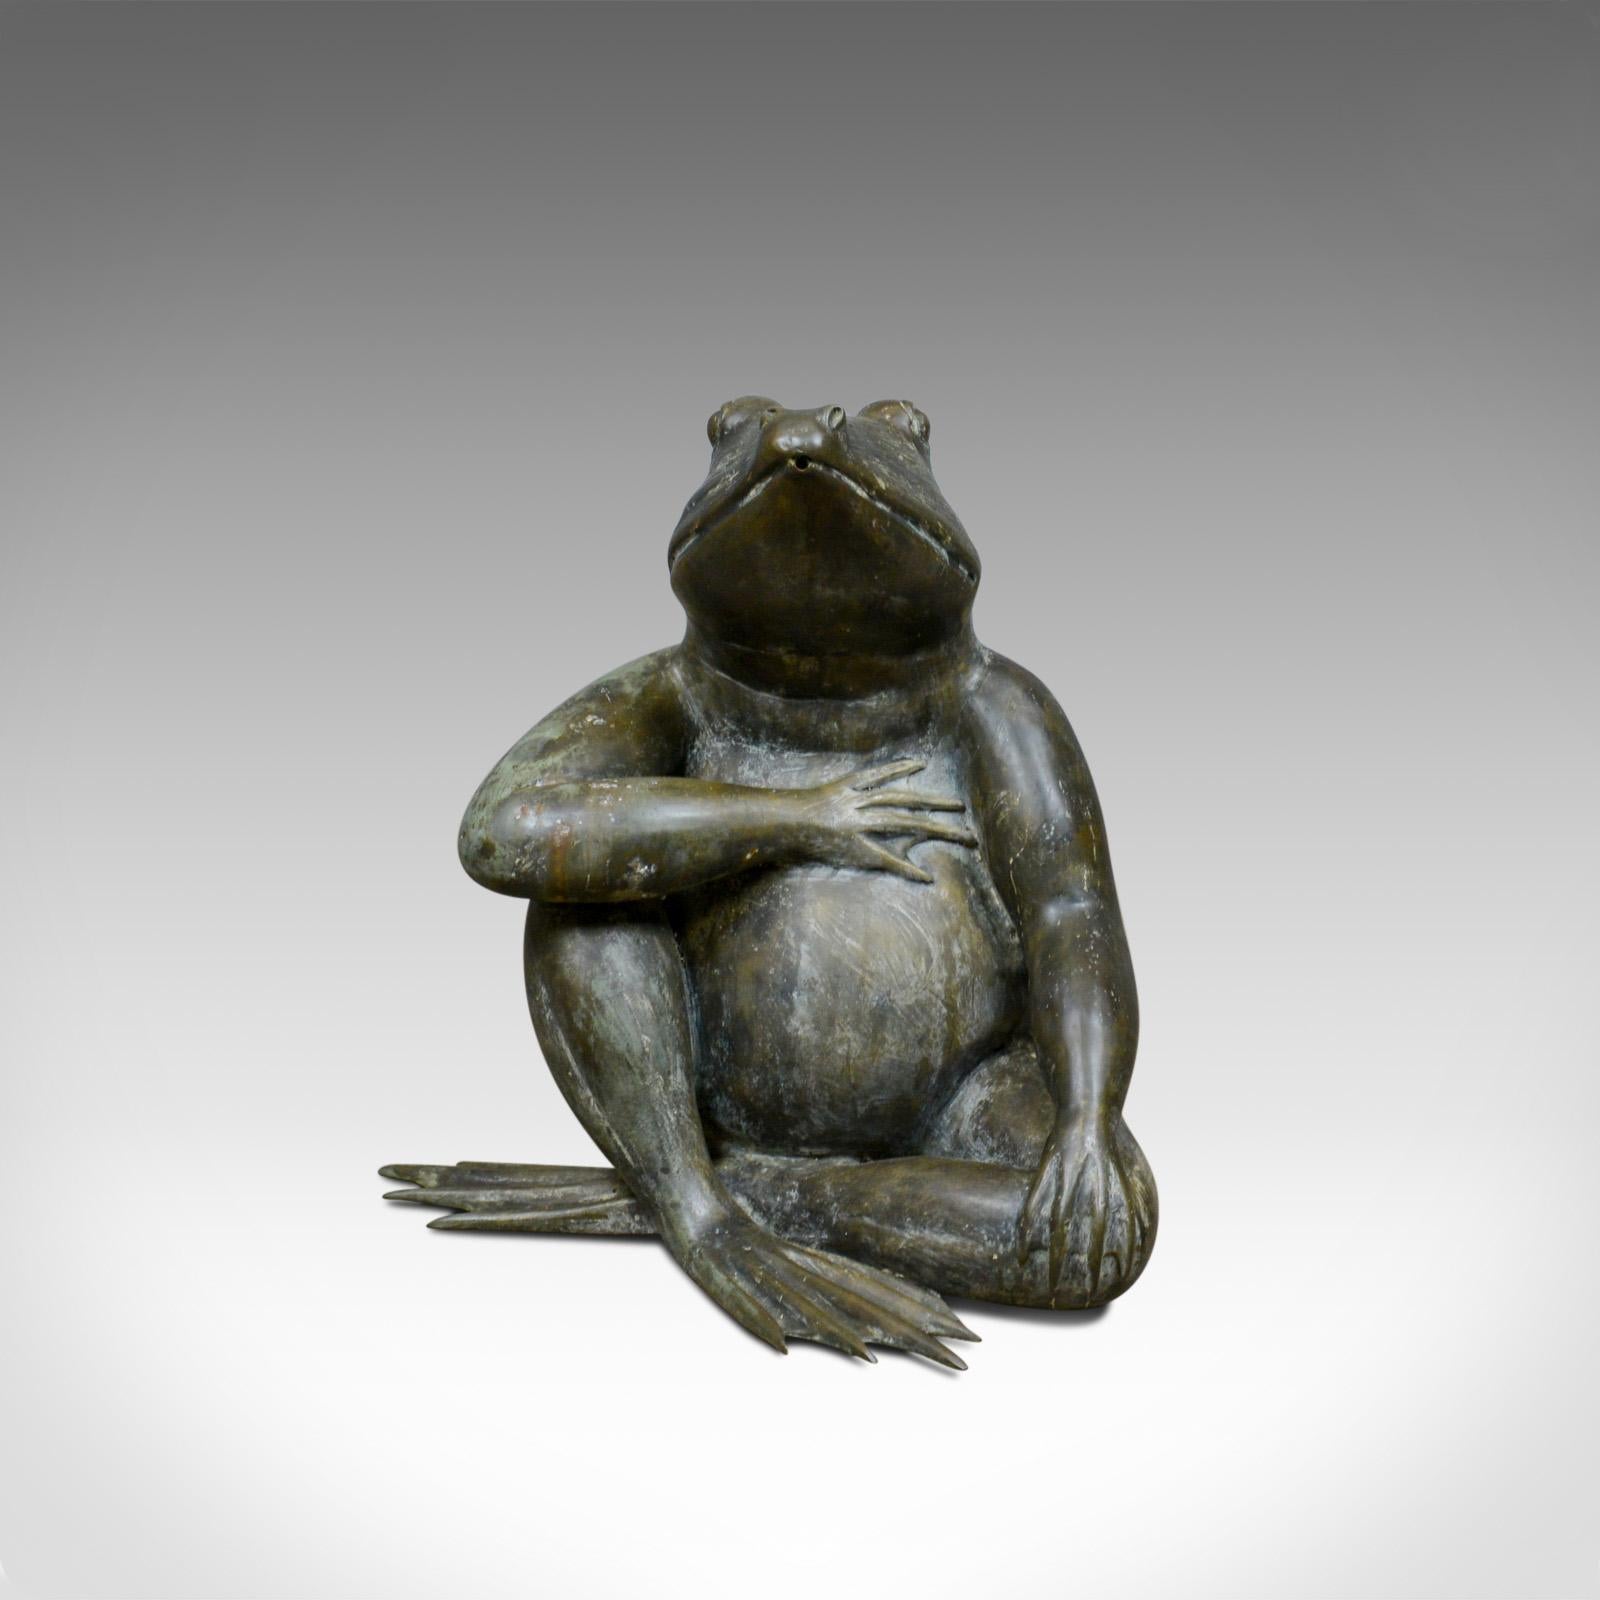 This is a large, vintage, bronze frog water feature. A decorative garden ornament dating to the 20th century.

Large, 0.5M (20 inches) high
Exceptional detail and presentation
Beautifully patinated bronze
Sat, legs crossed in casual